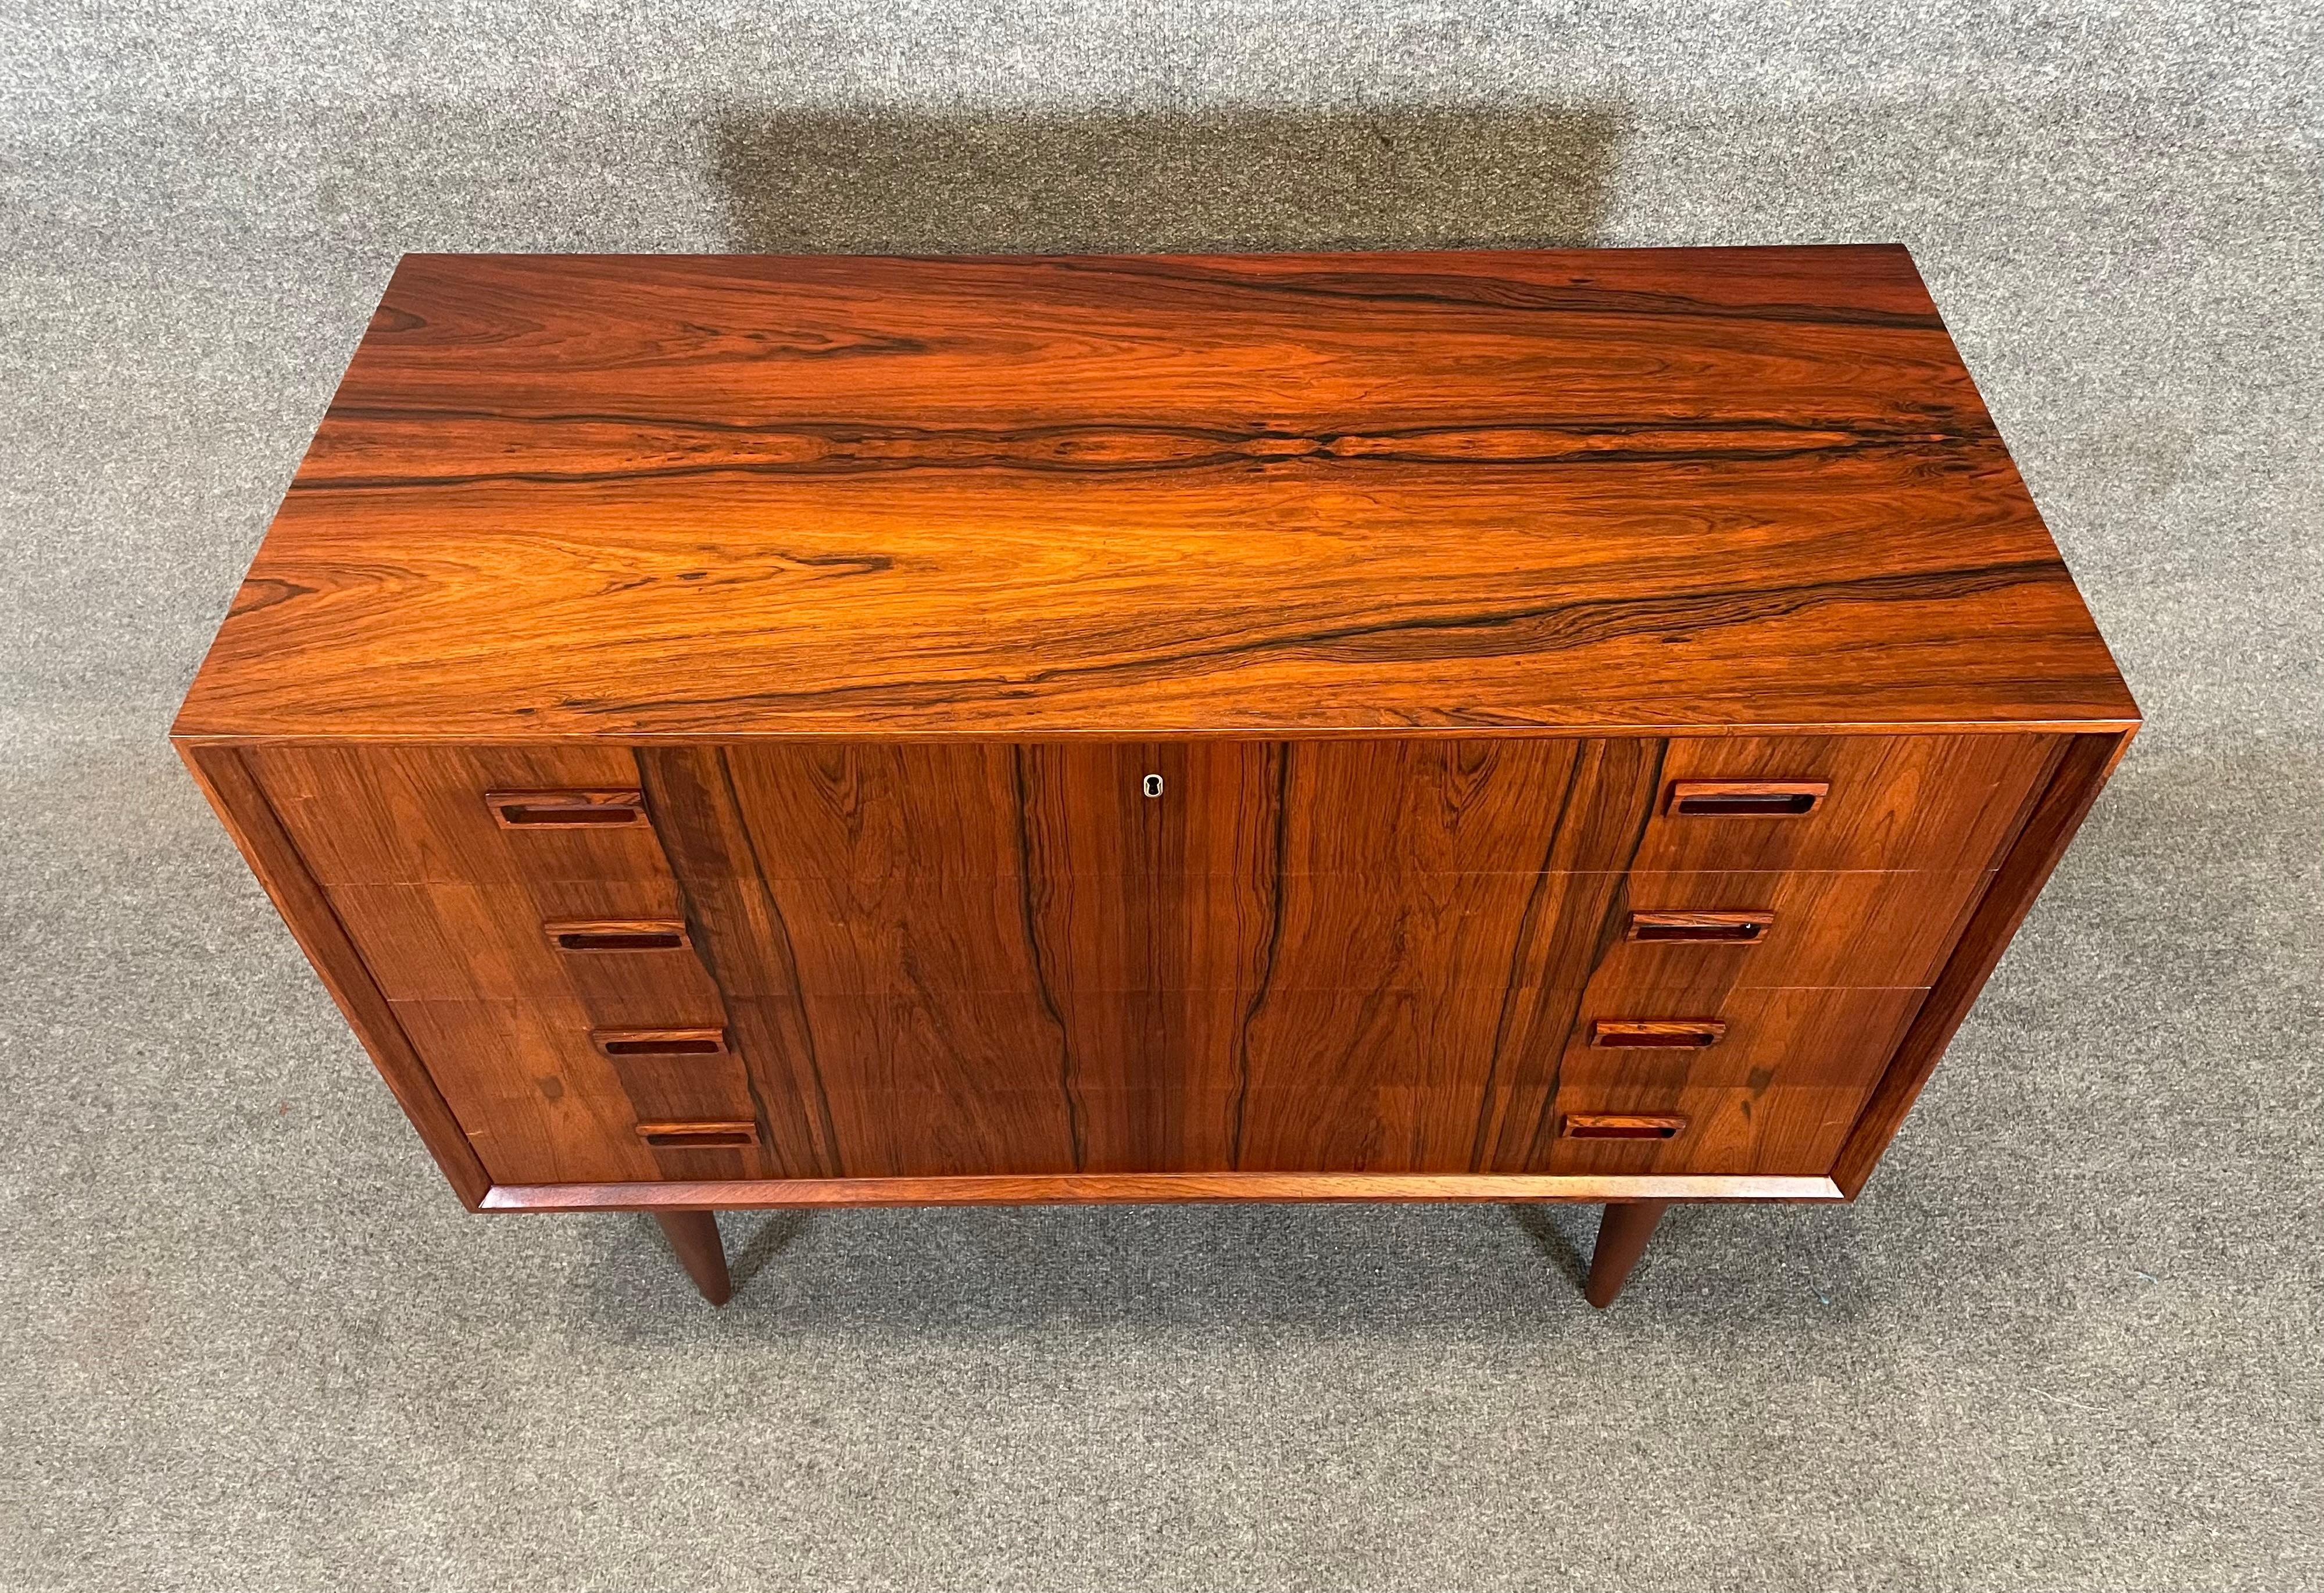 Vintage Danish Mid Century Modern Rosewood Lowboy Dresser In Good Condition For Sale In San Marcos, CA